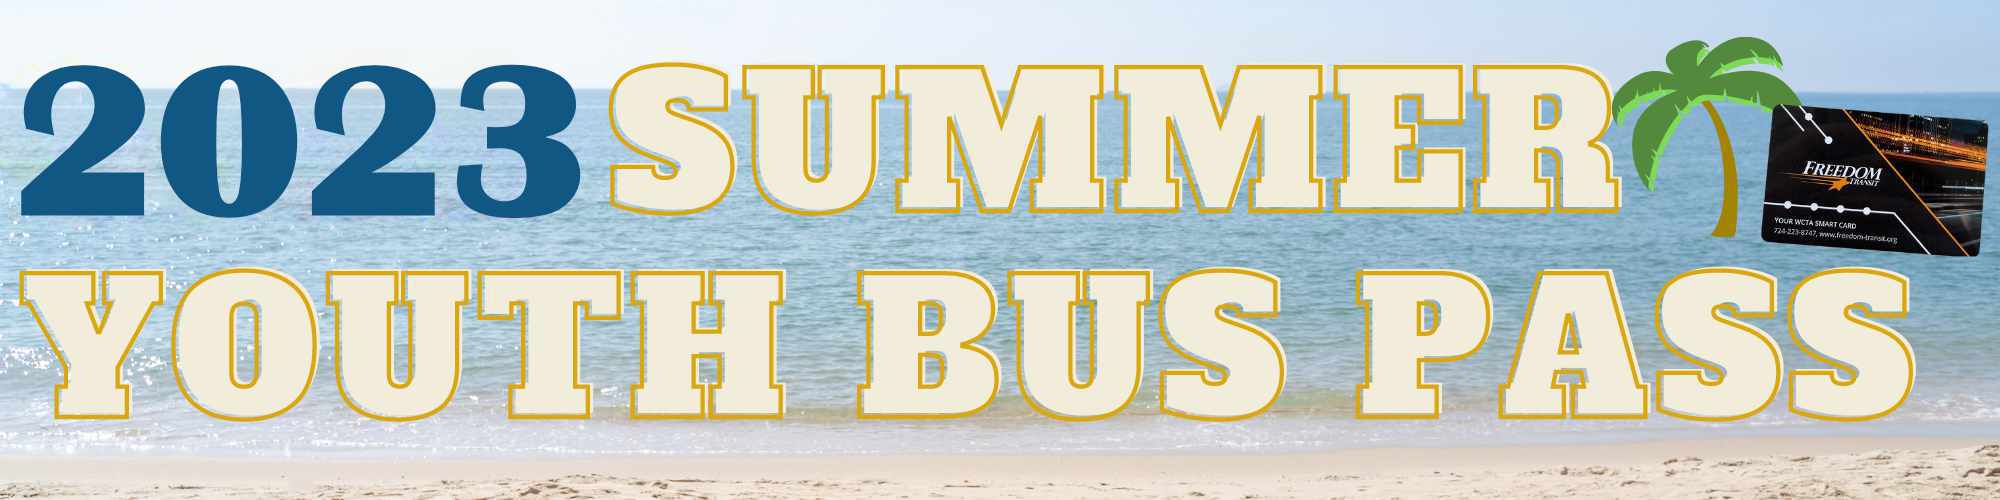 Freedom Transit Summer Youth Bus Passes available for Summer 2023!